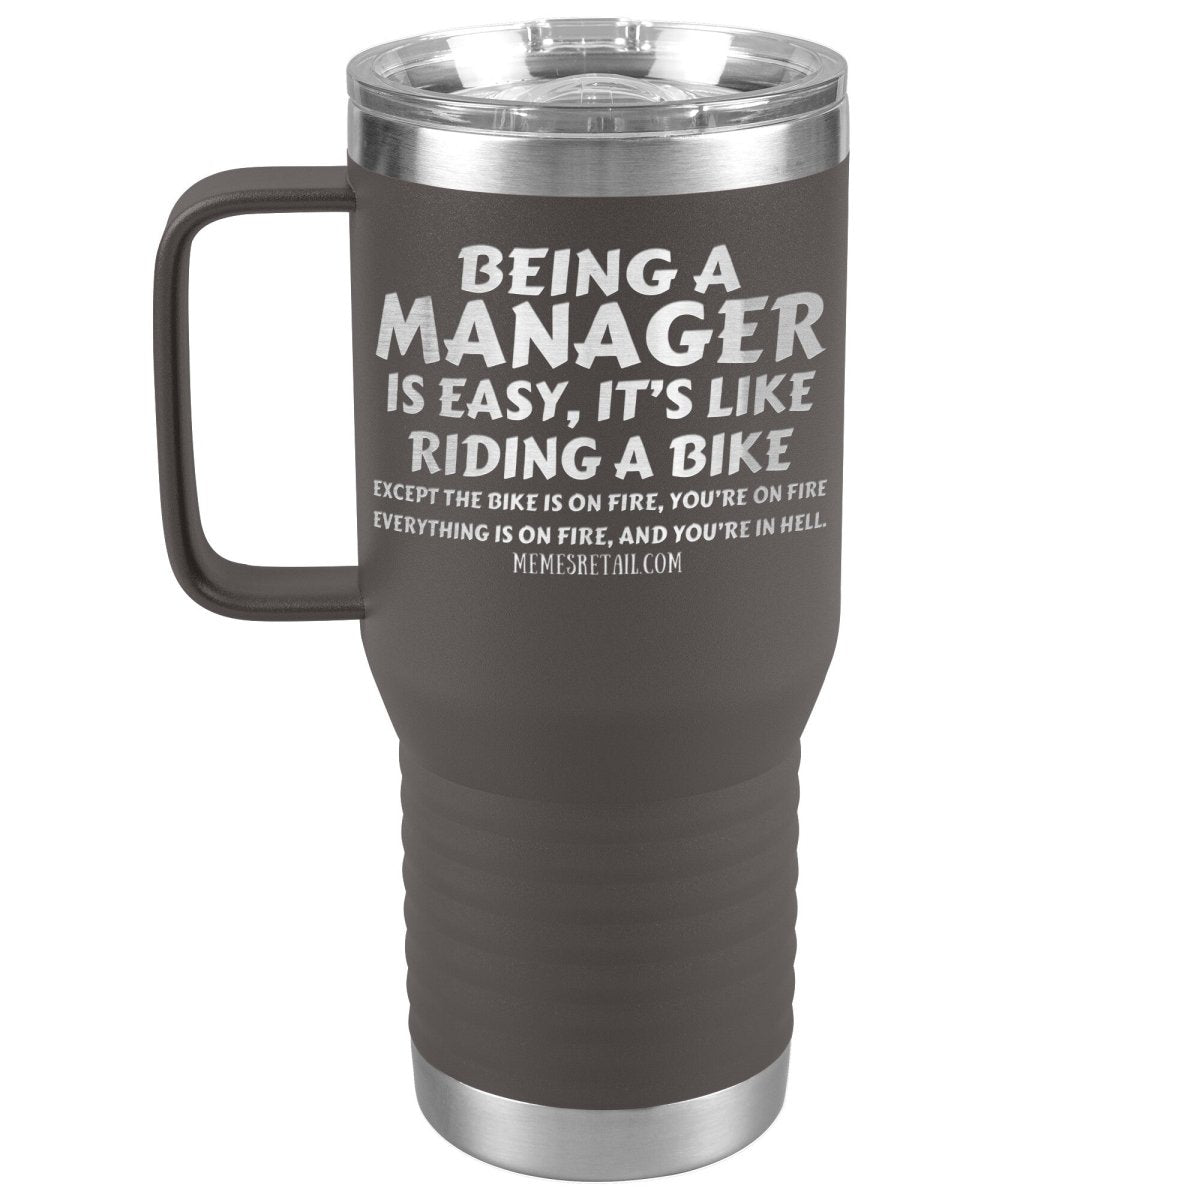 Being a manager is easy Tumblers, 20oz Travel Tumbler / Pewter - MemesRetail.com